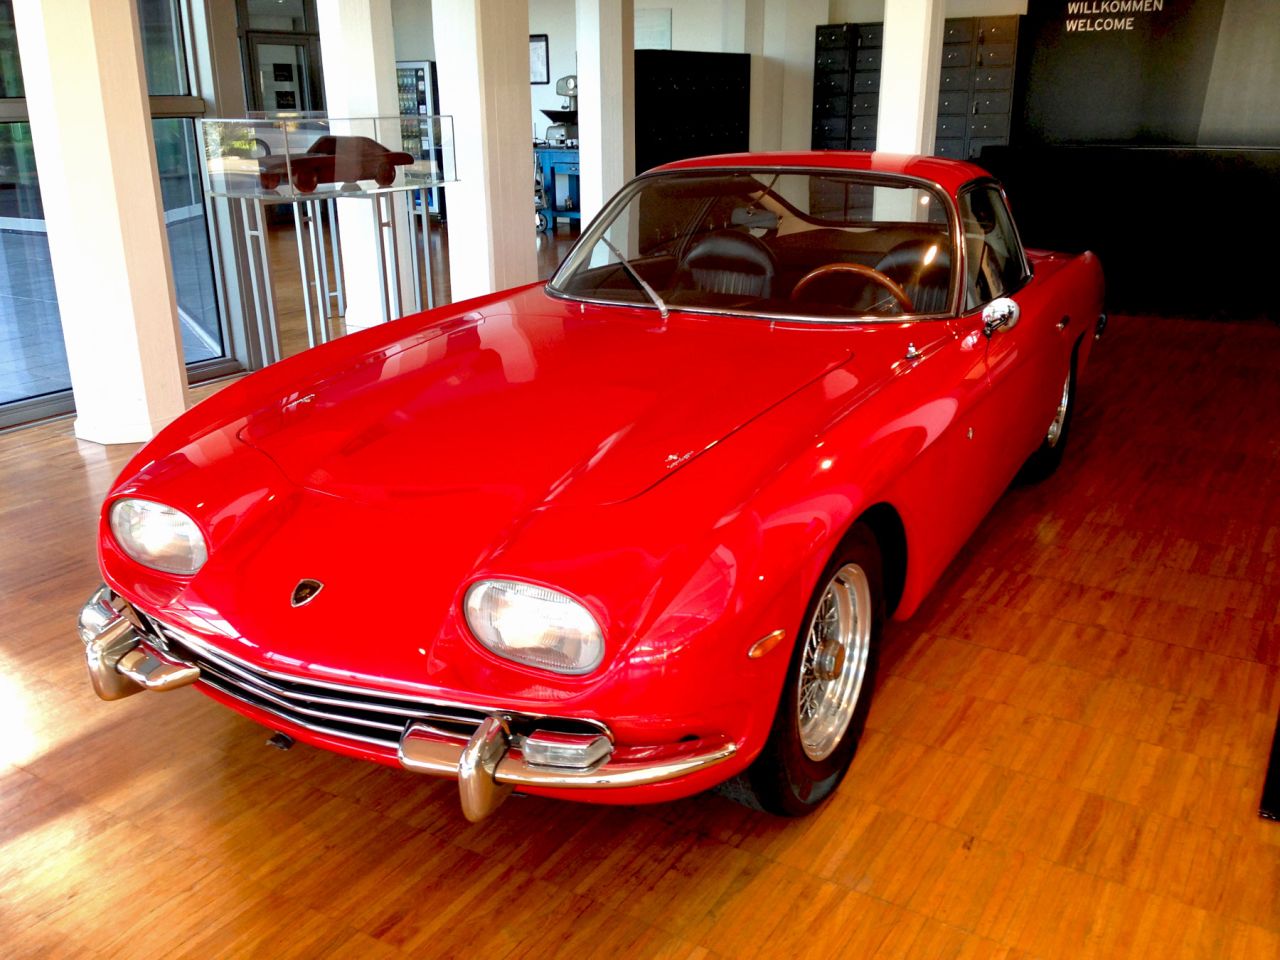 A 1964 Lamborghini 350 GT at the automaker's Museum in Sant'Agata Bolognese in the heart of Italy's "Motor Valley."